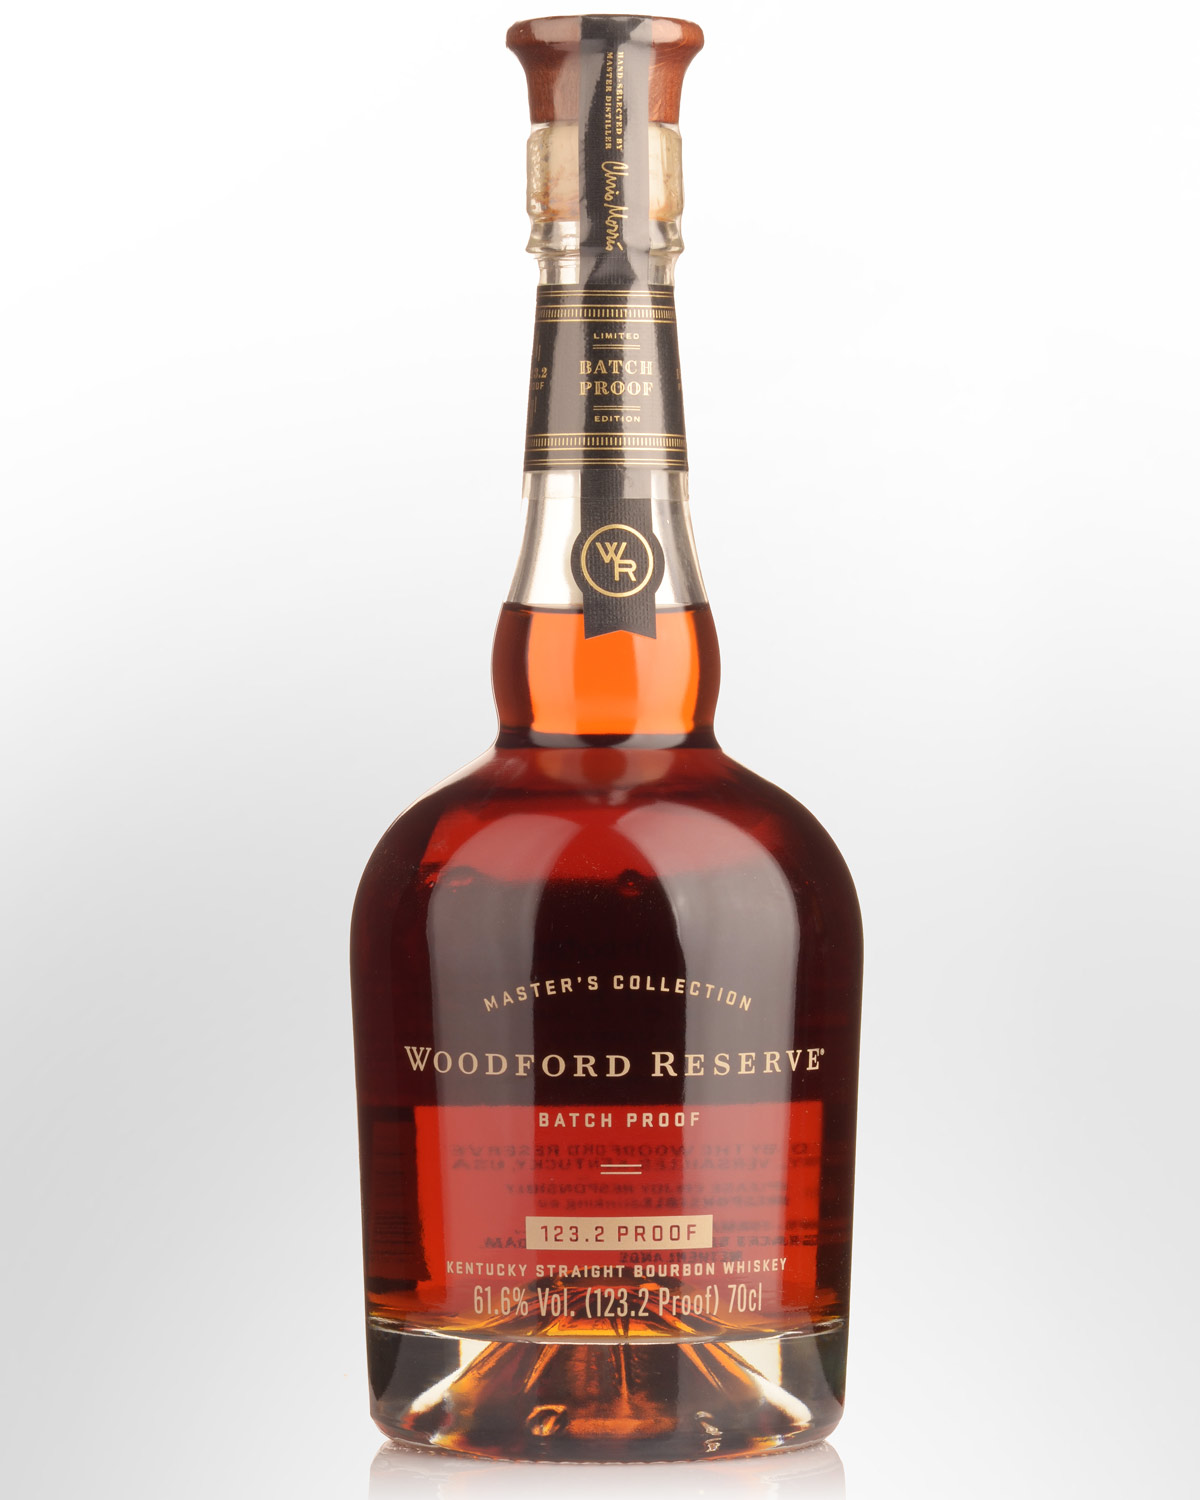 Woodford Reserve Master's Collection Batch Proof 2019 Release 123.2